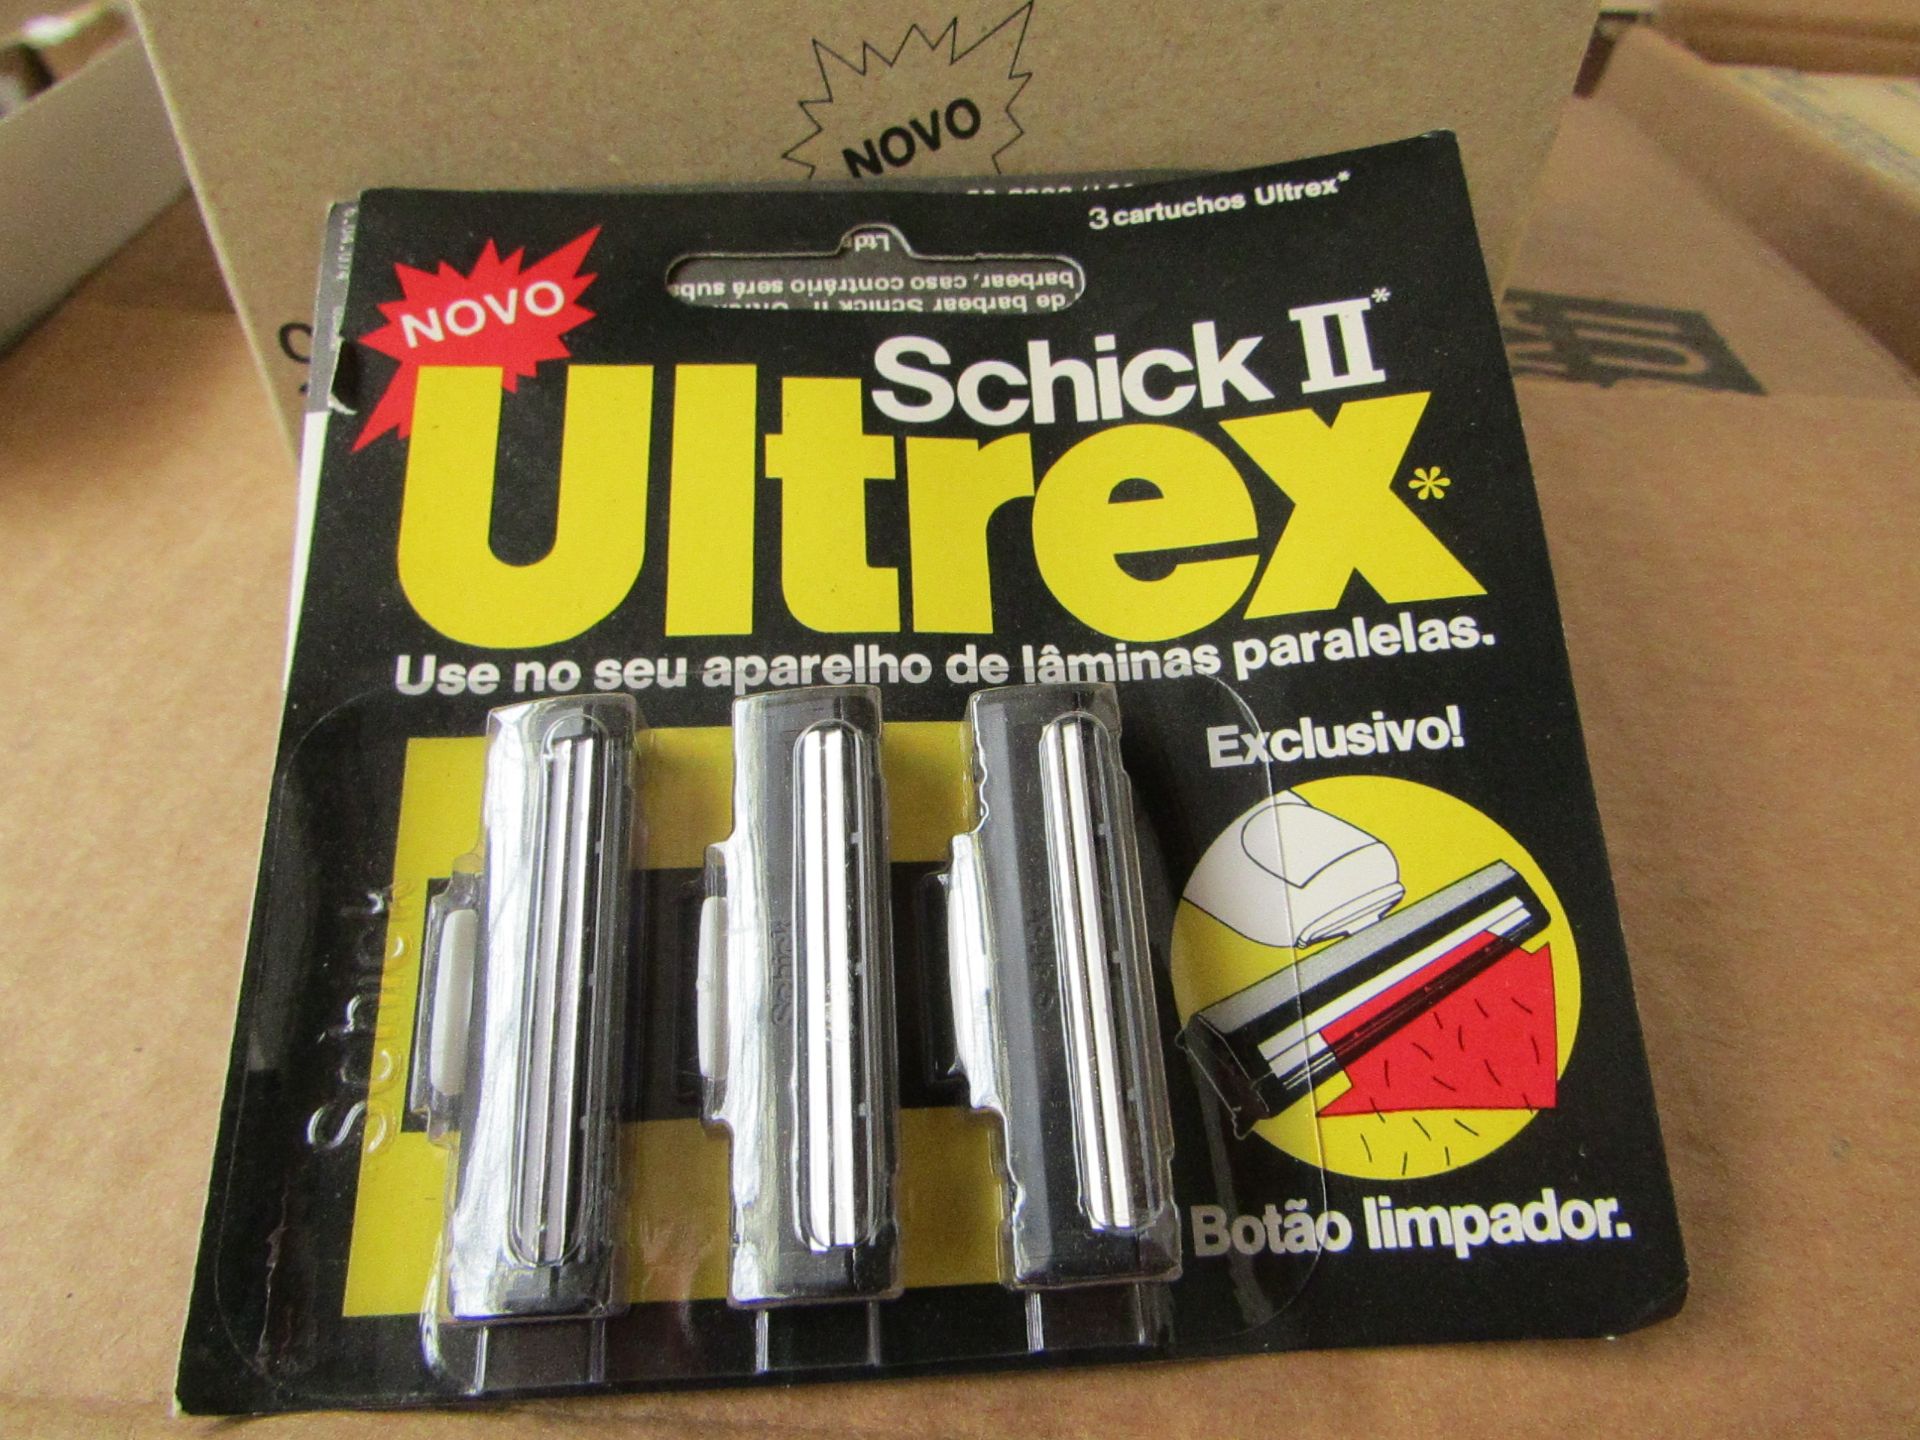 2 x Ultrex Schick box of 24 x 3 replacement blades, new and sealed